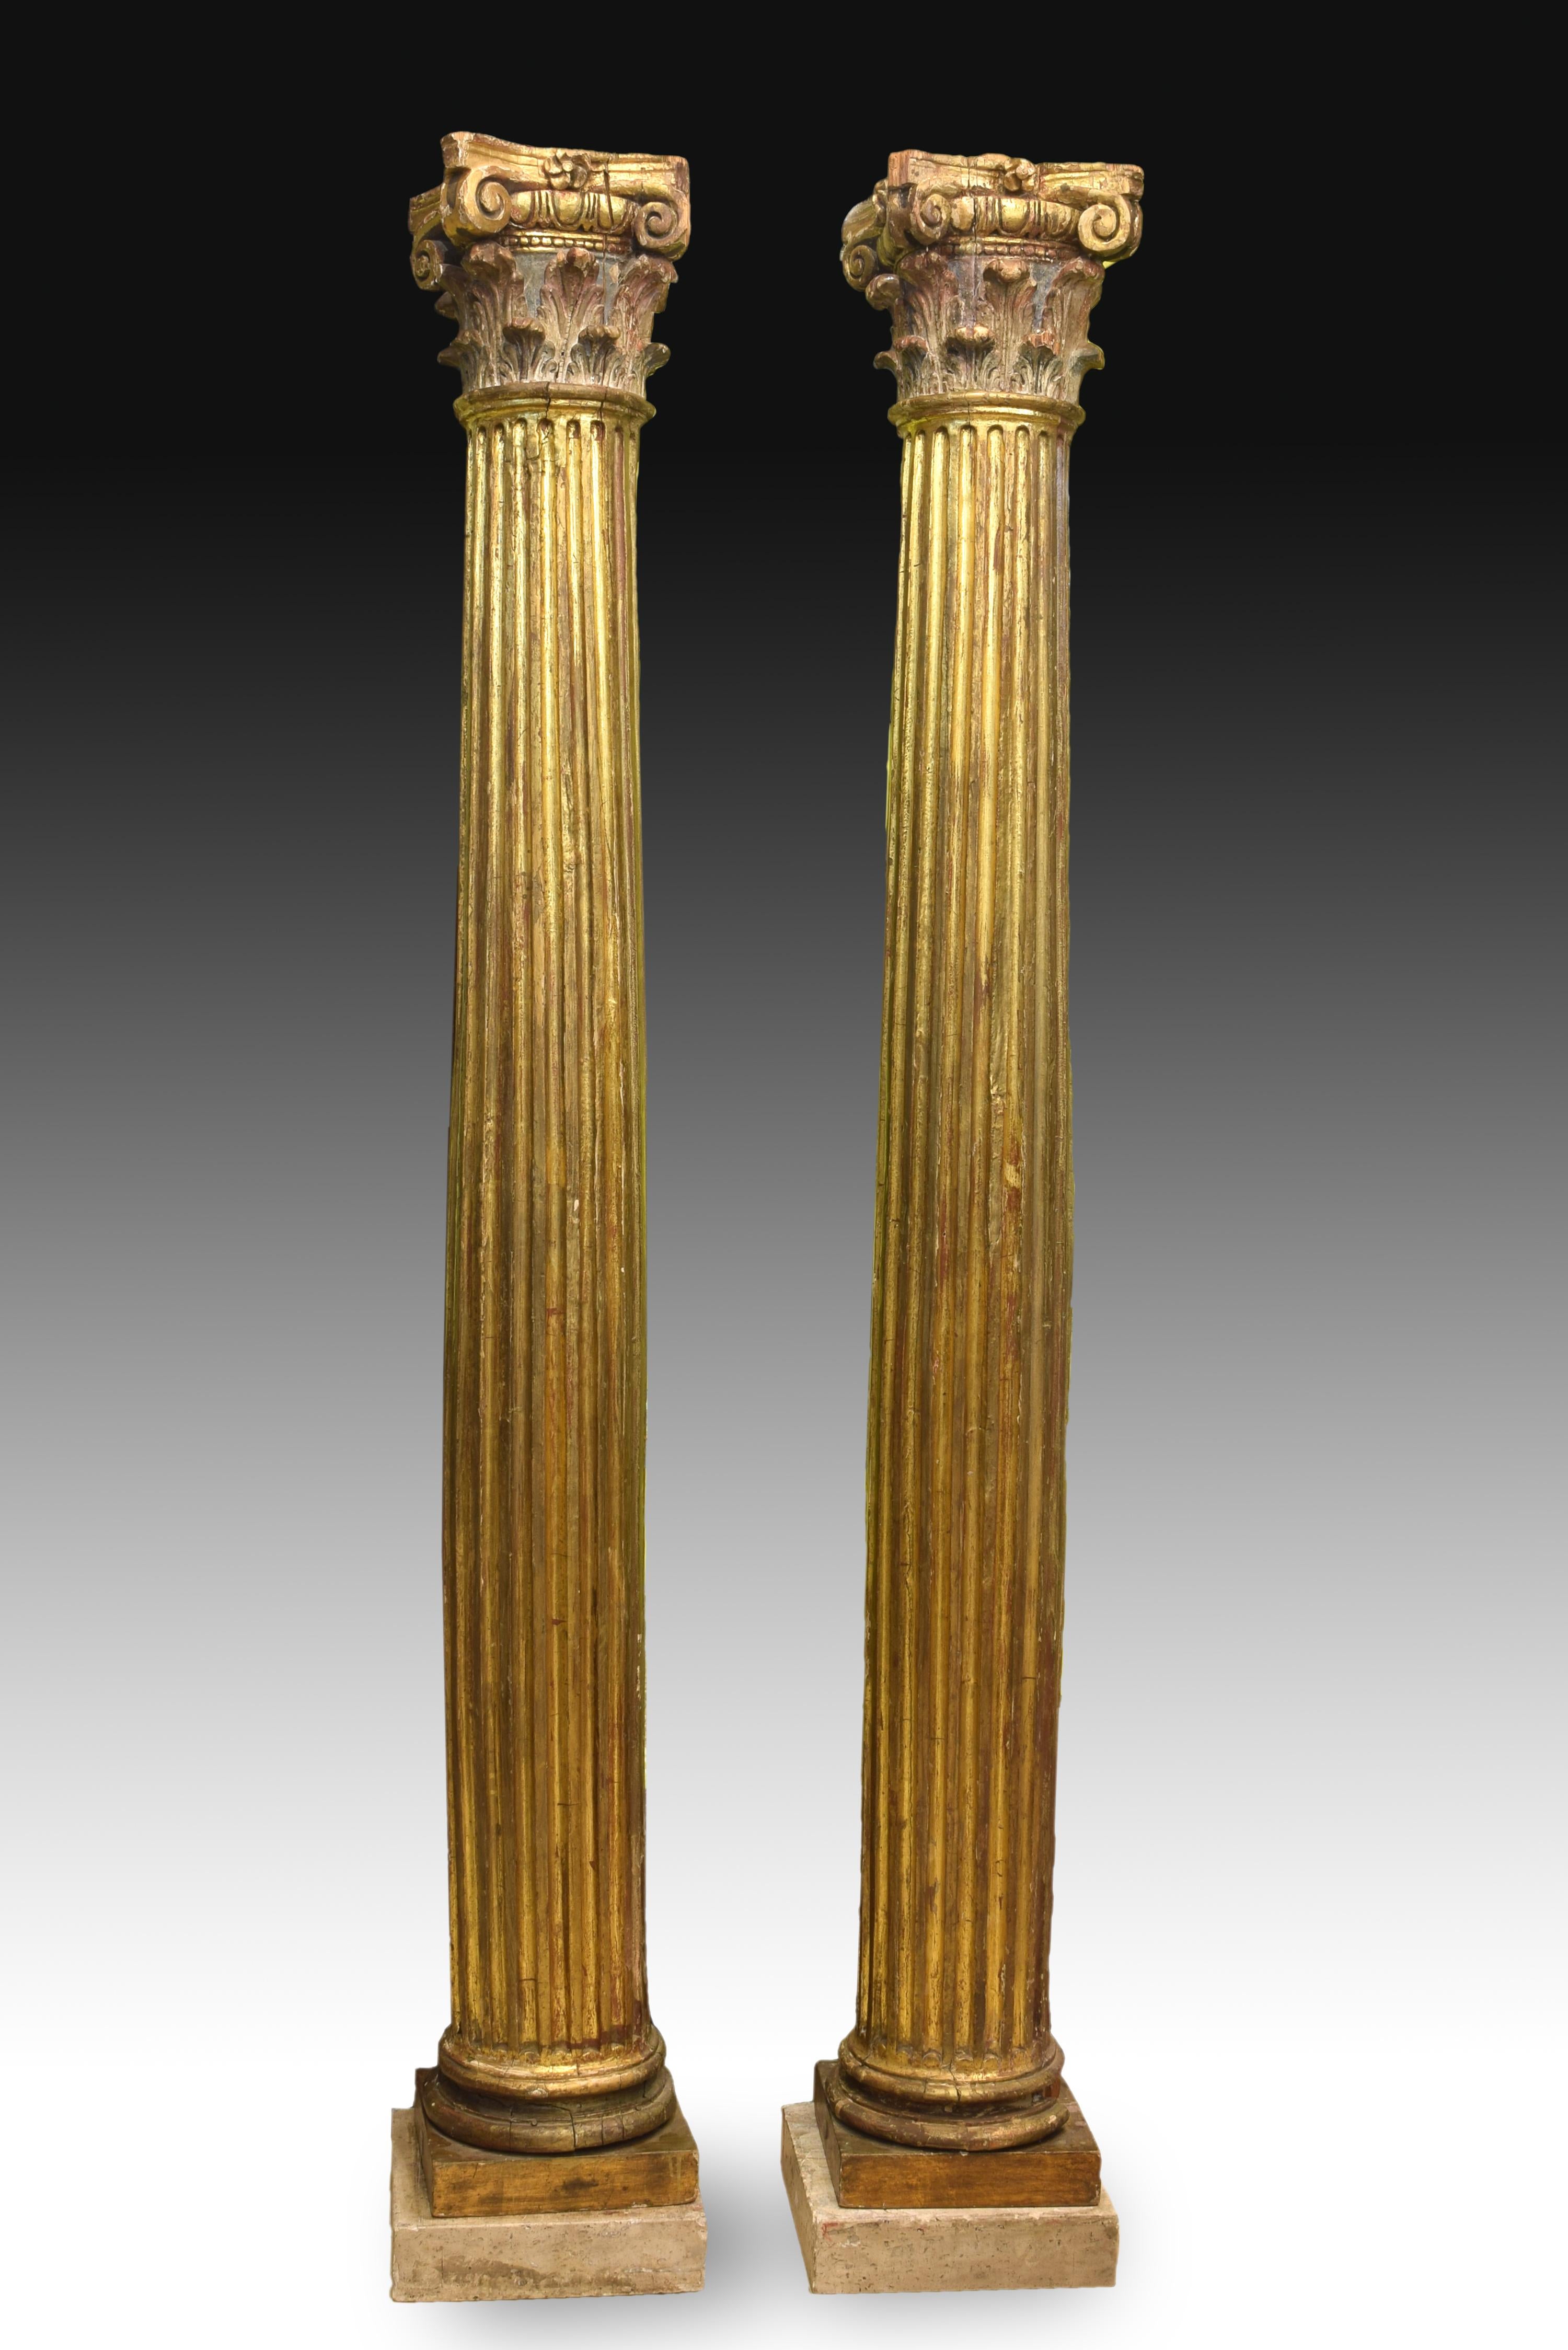 Hand-Crafted Pair of Columns, Polychromed and Gilt Walnut Wood, 17th Century